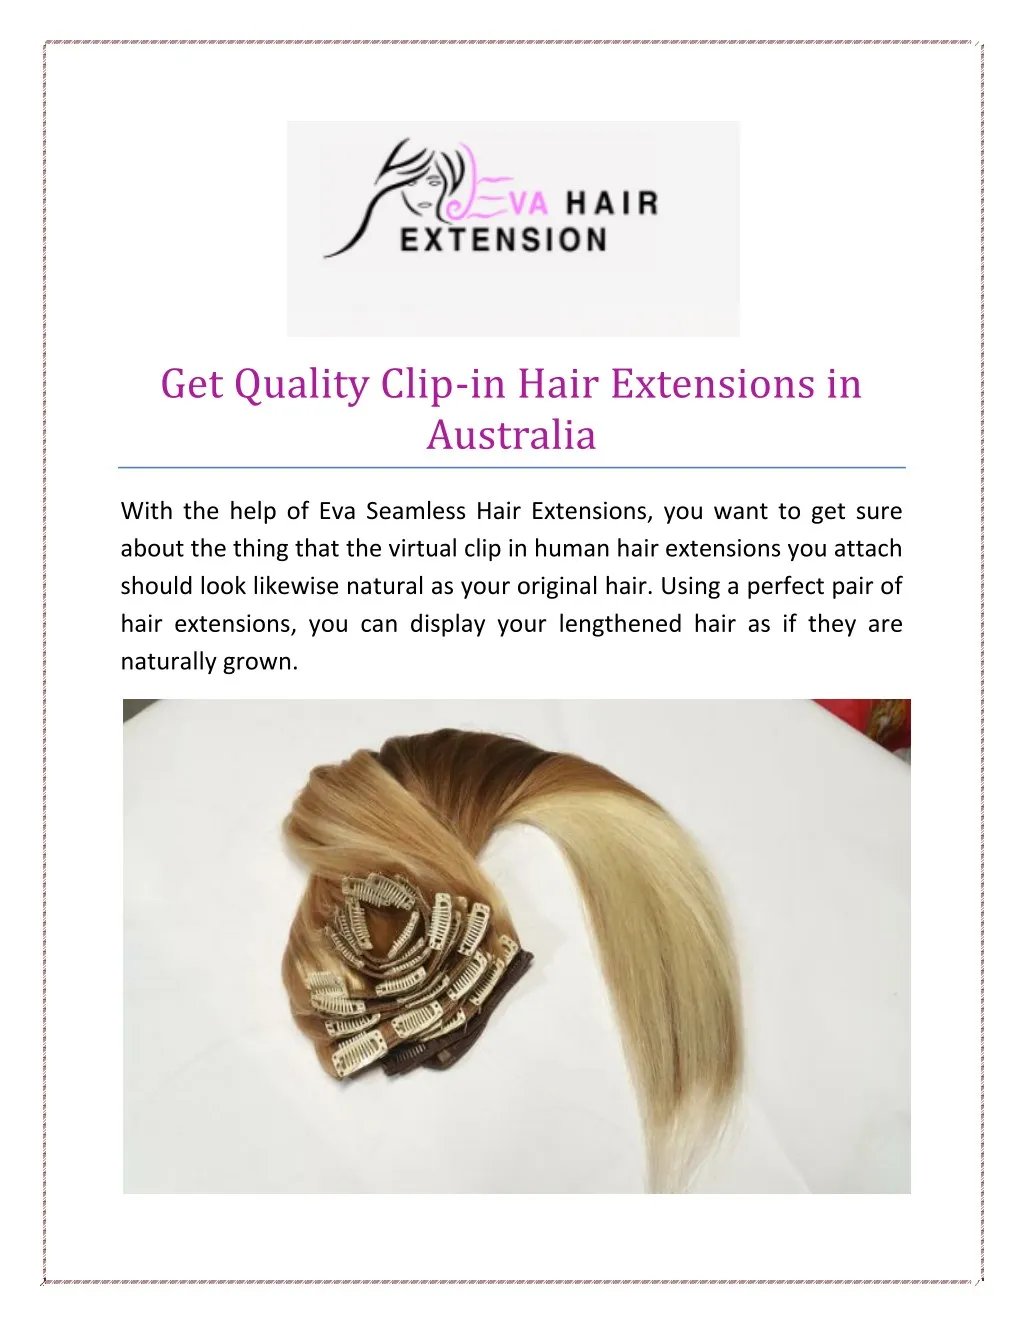 get quality clip in hair extensions in australia